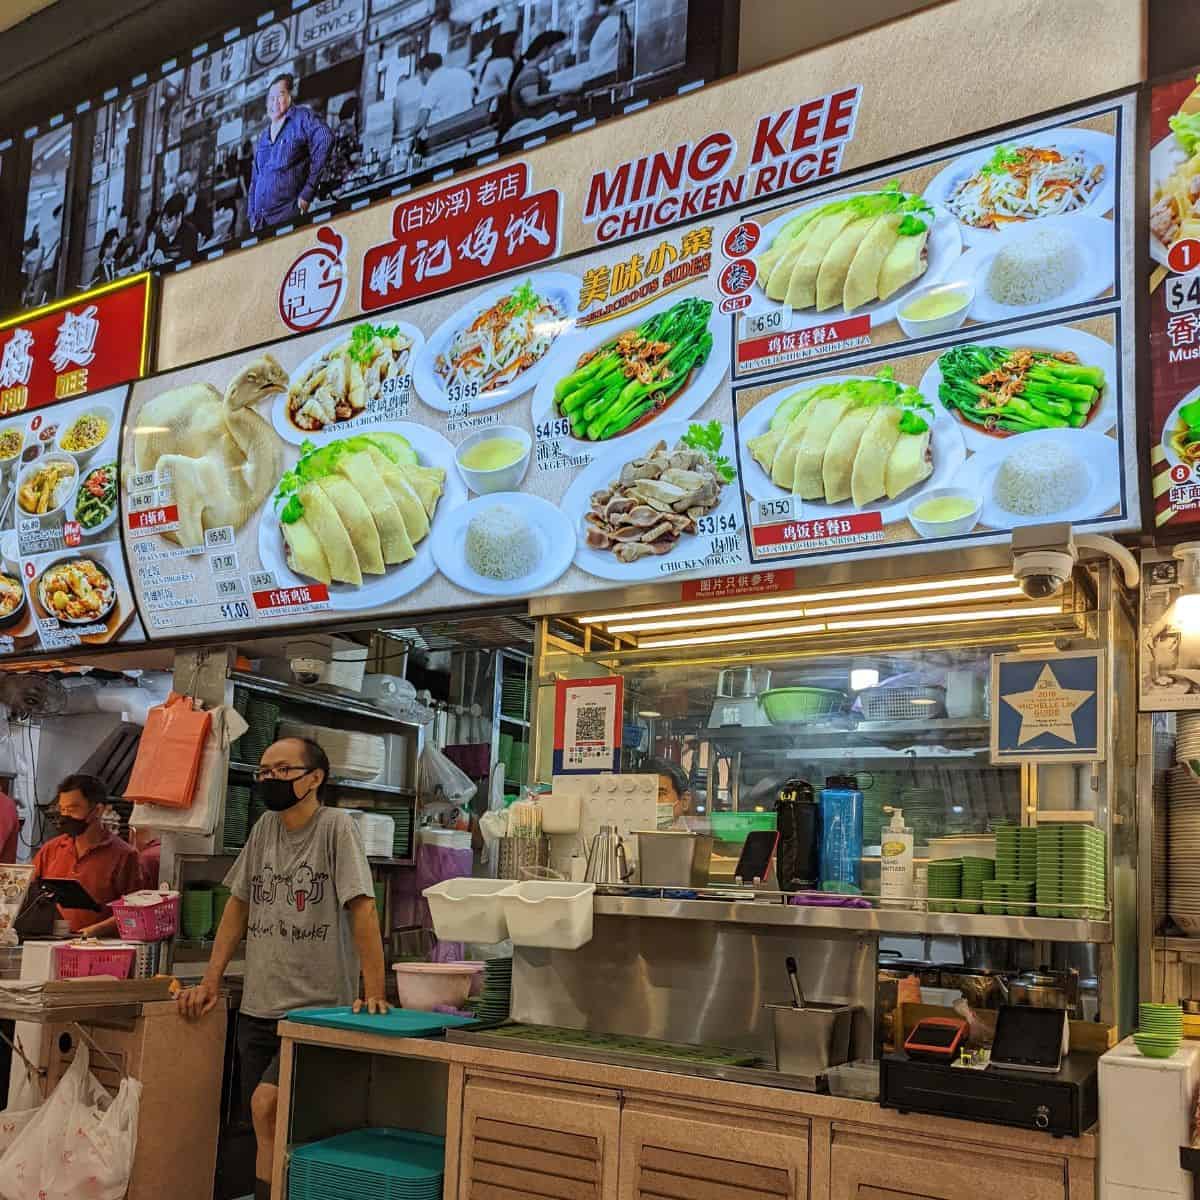 Ming Kee Chicken Rice stall